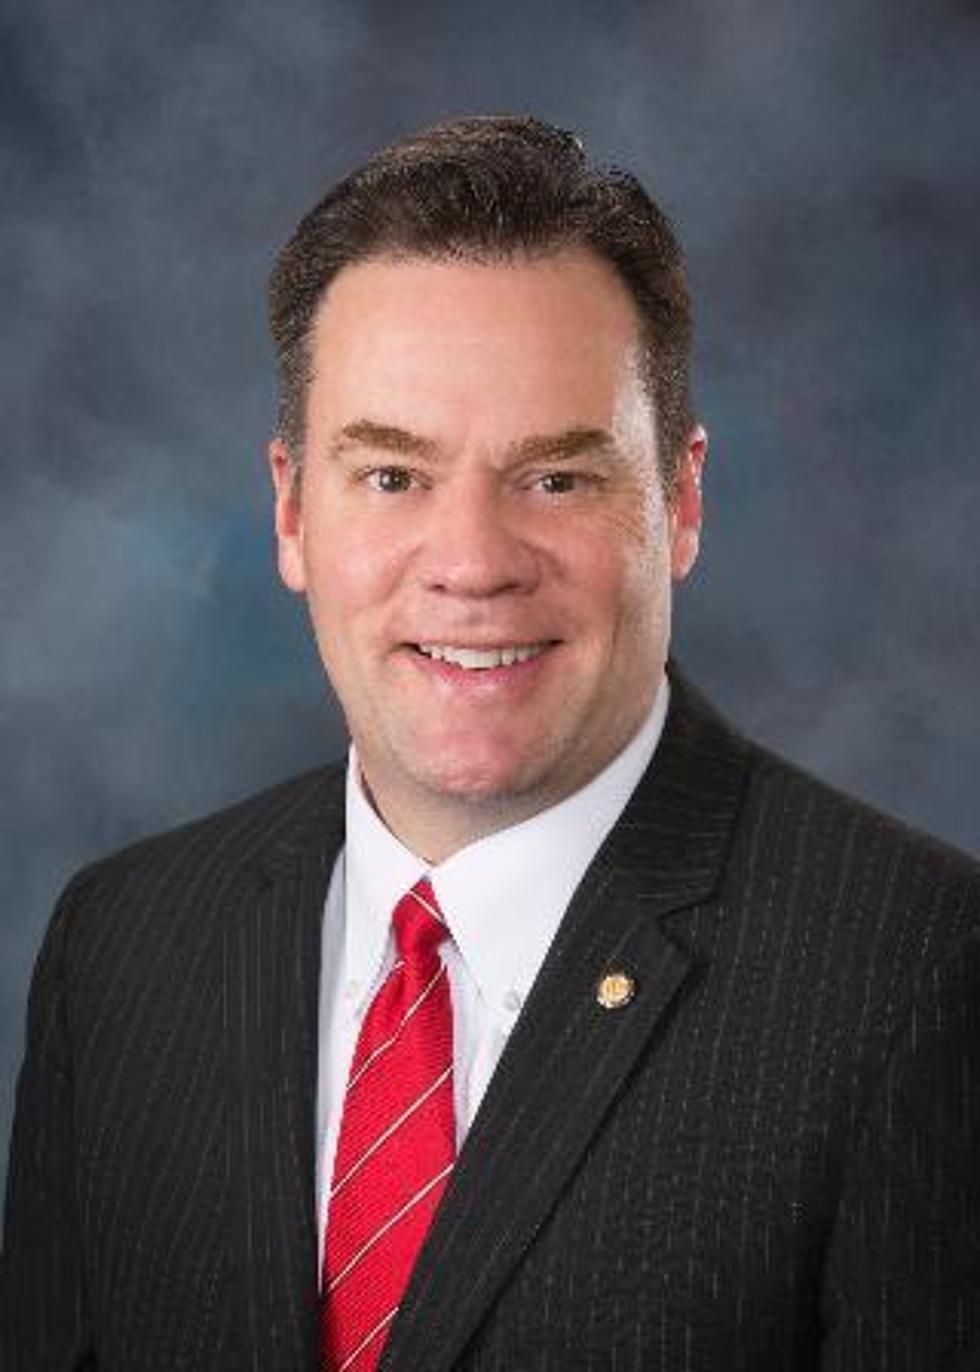 Idaho State Senator Officialy Files to Run for Governor